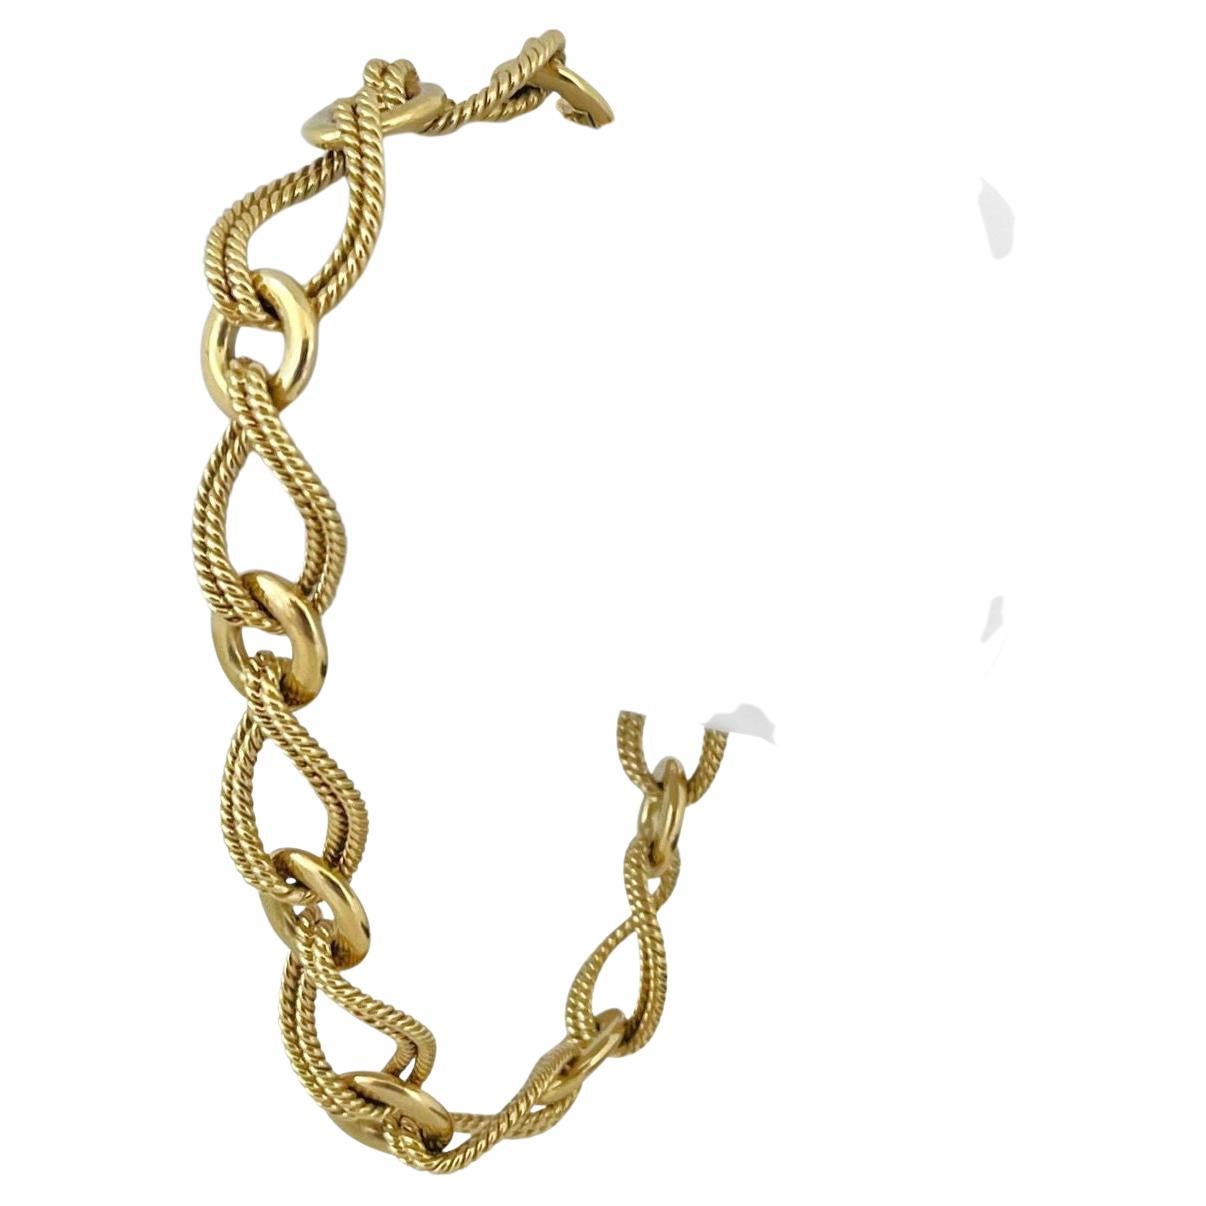 18 Karat Yellow Gold Solid Vintage Fancy Cable Link Bracelet, Italy